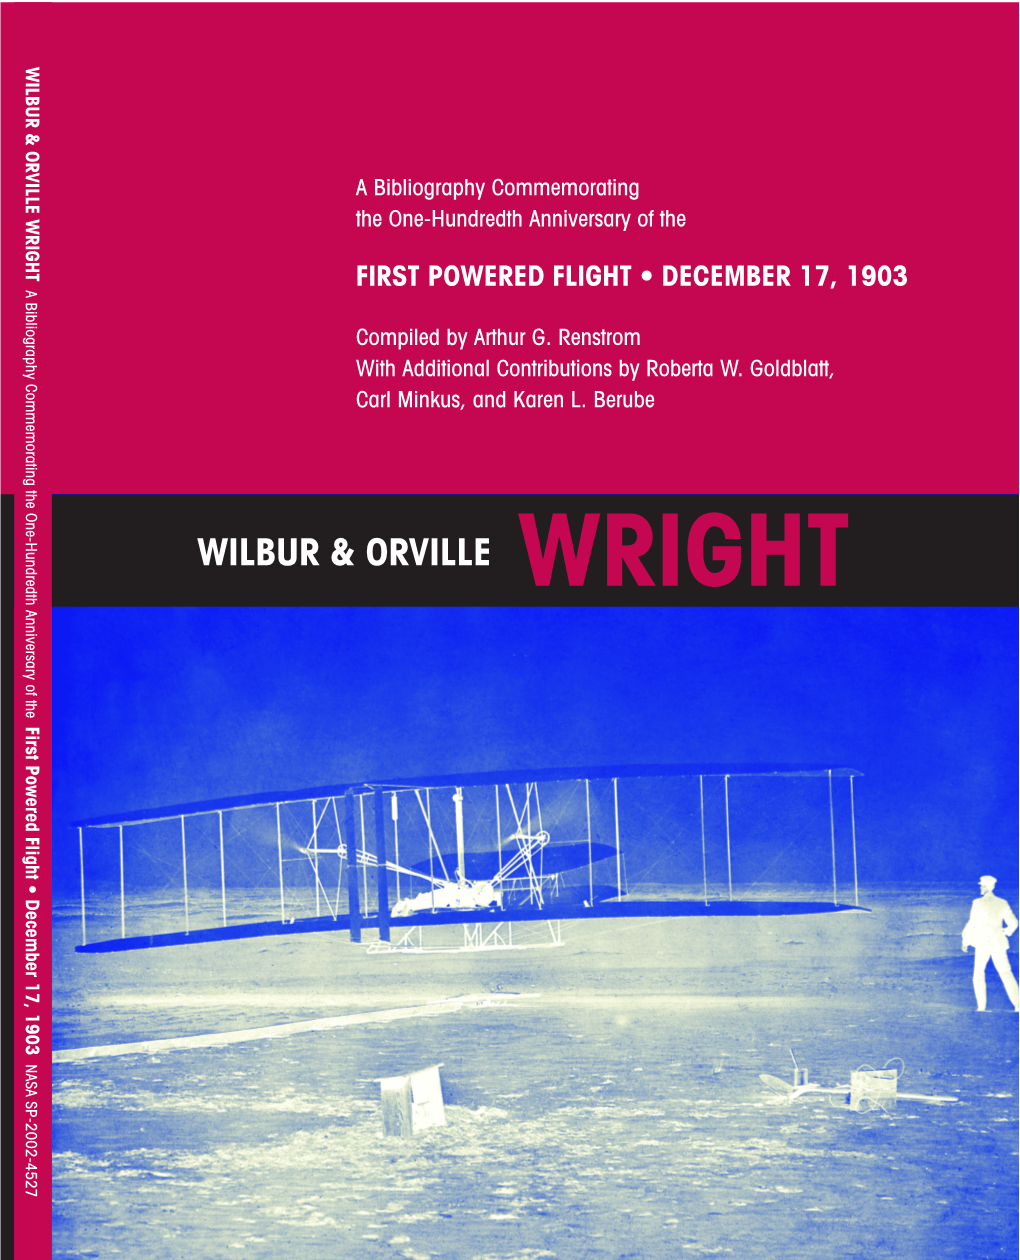 Wilbur and Orville Wright: a Bibliography Commemorating the One-Hundredth Anniversary of the First Powered Flight